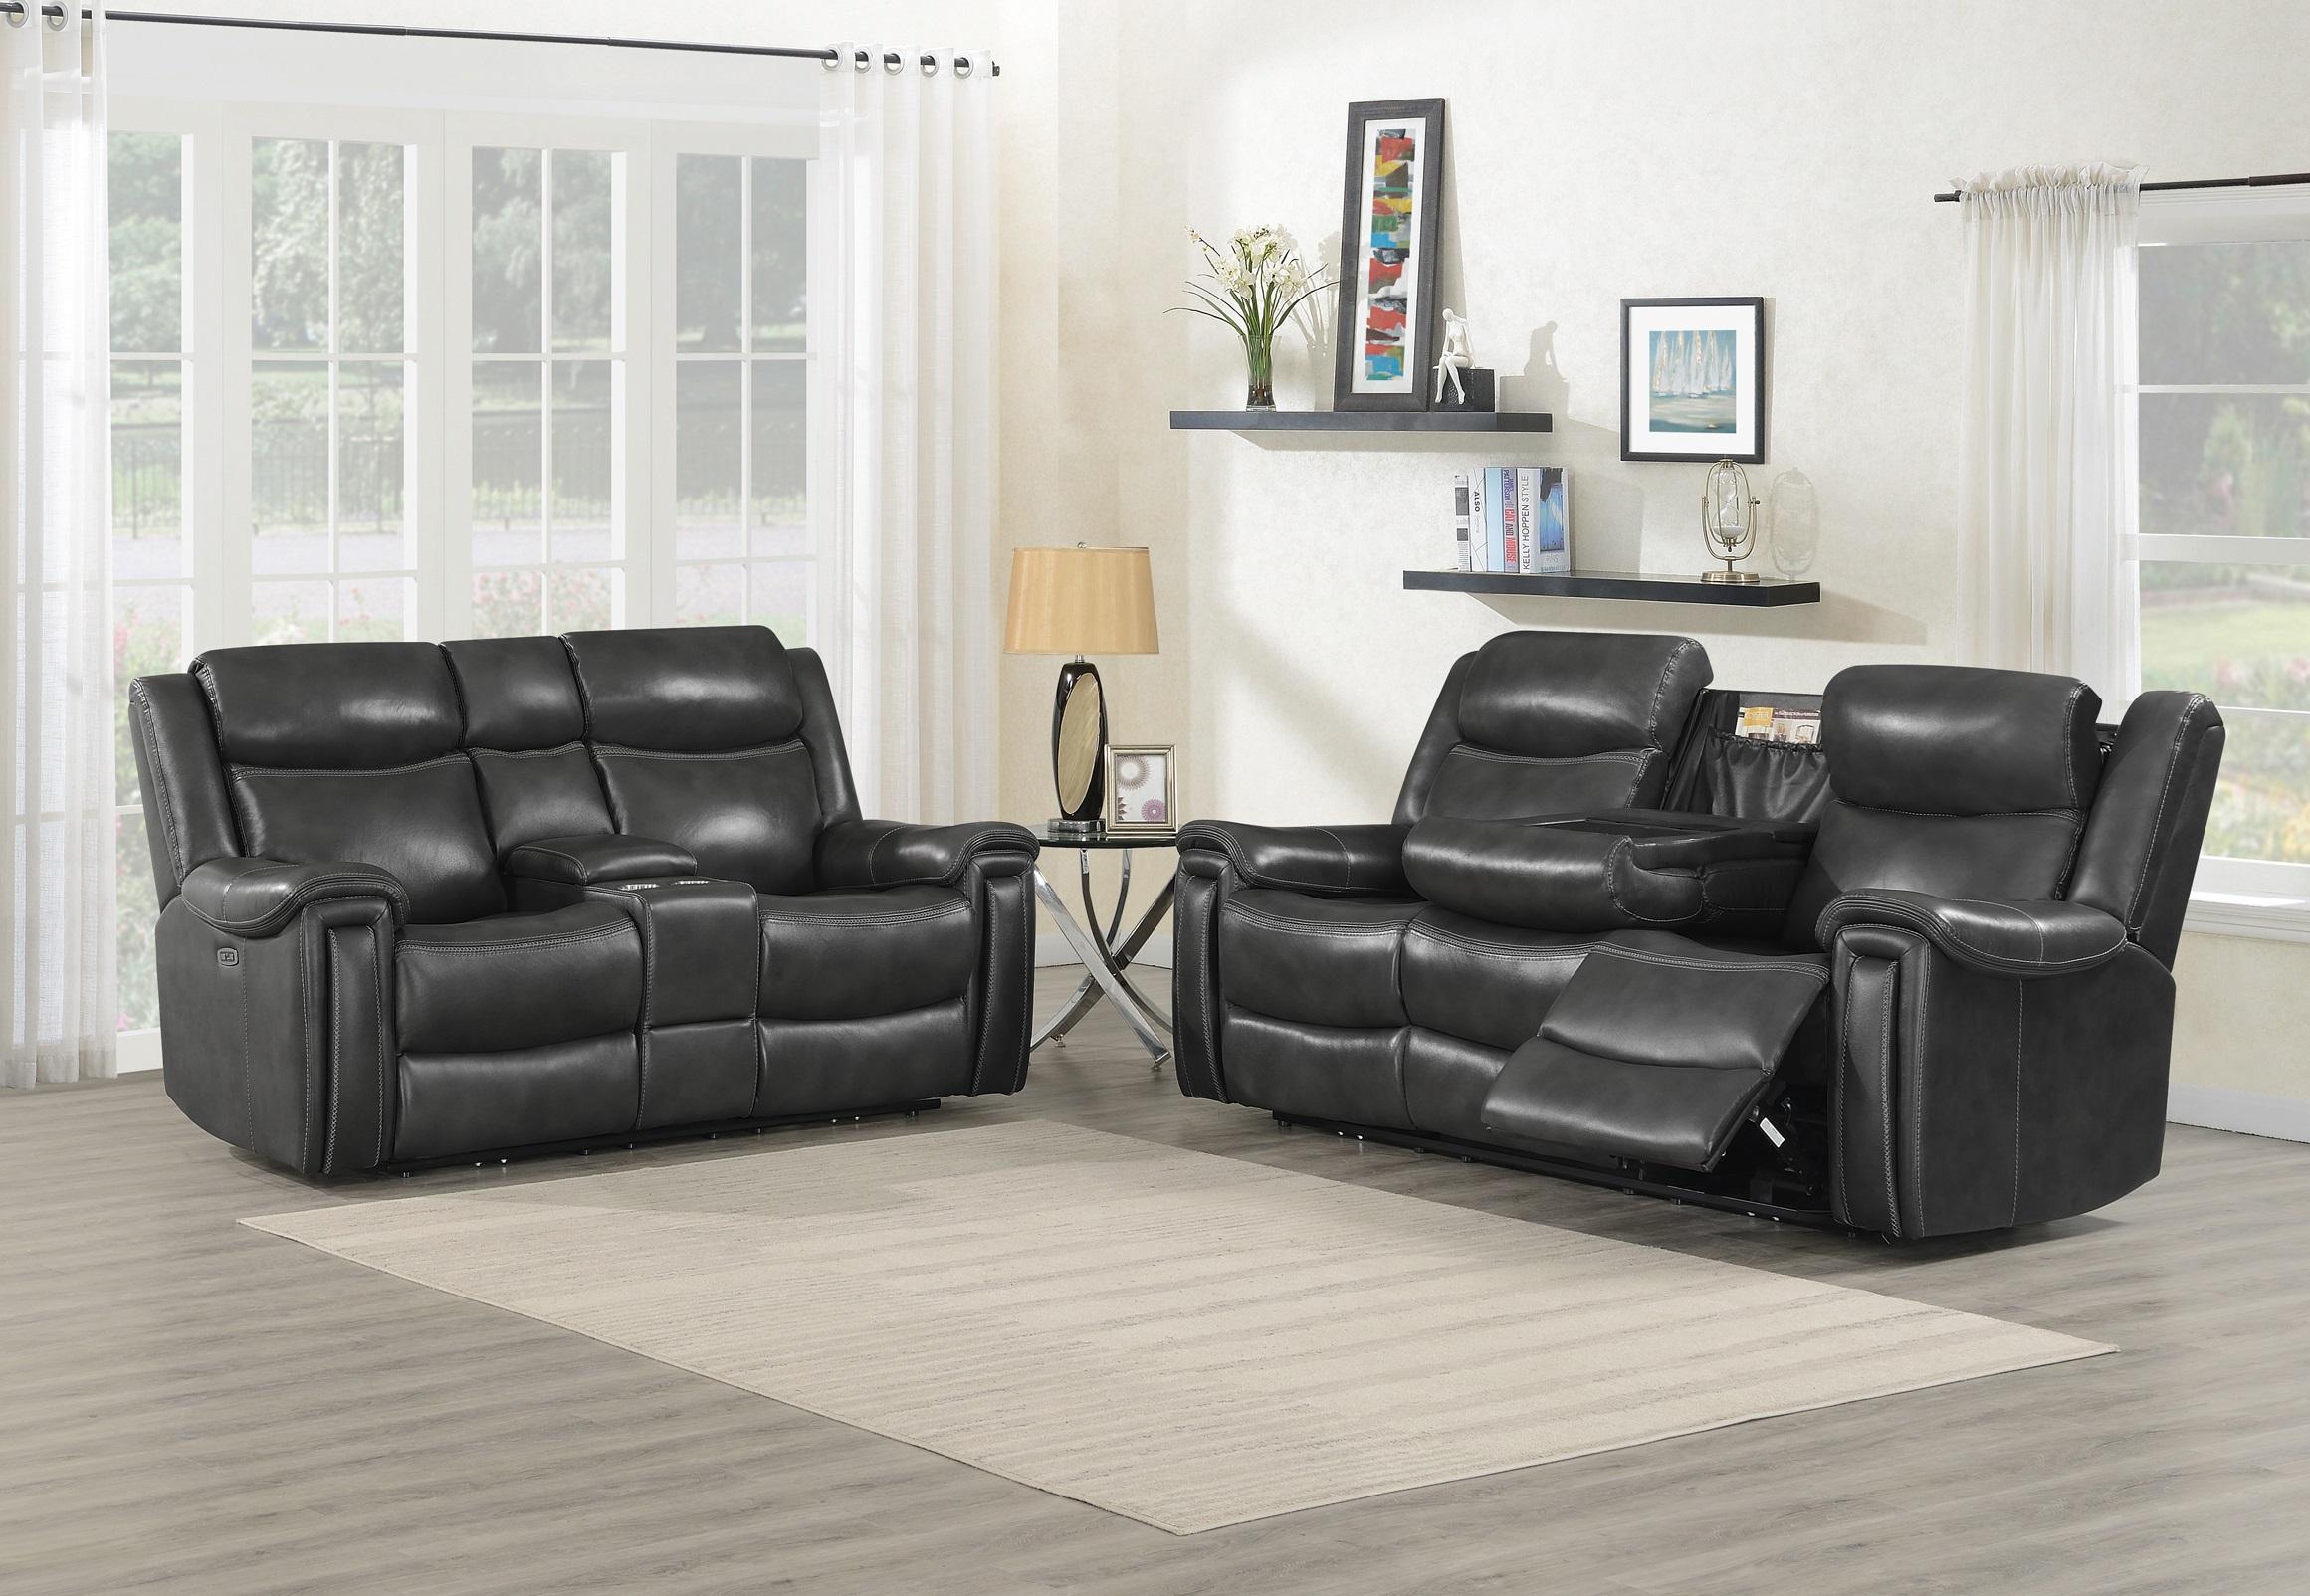 Transitional Power Sofa Set 609321PPI-S2 Shallowford 609321PPI-S2 in Charcoal Leather